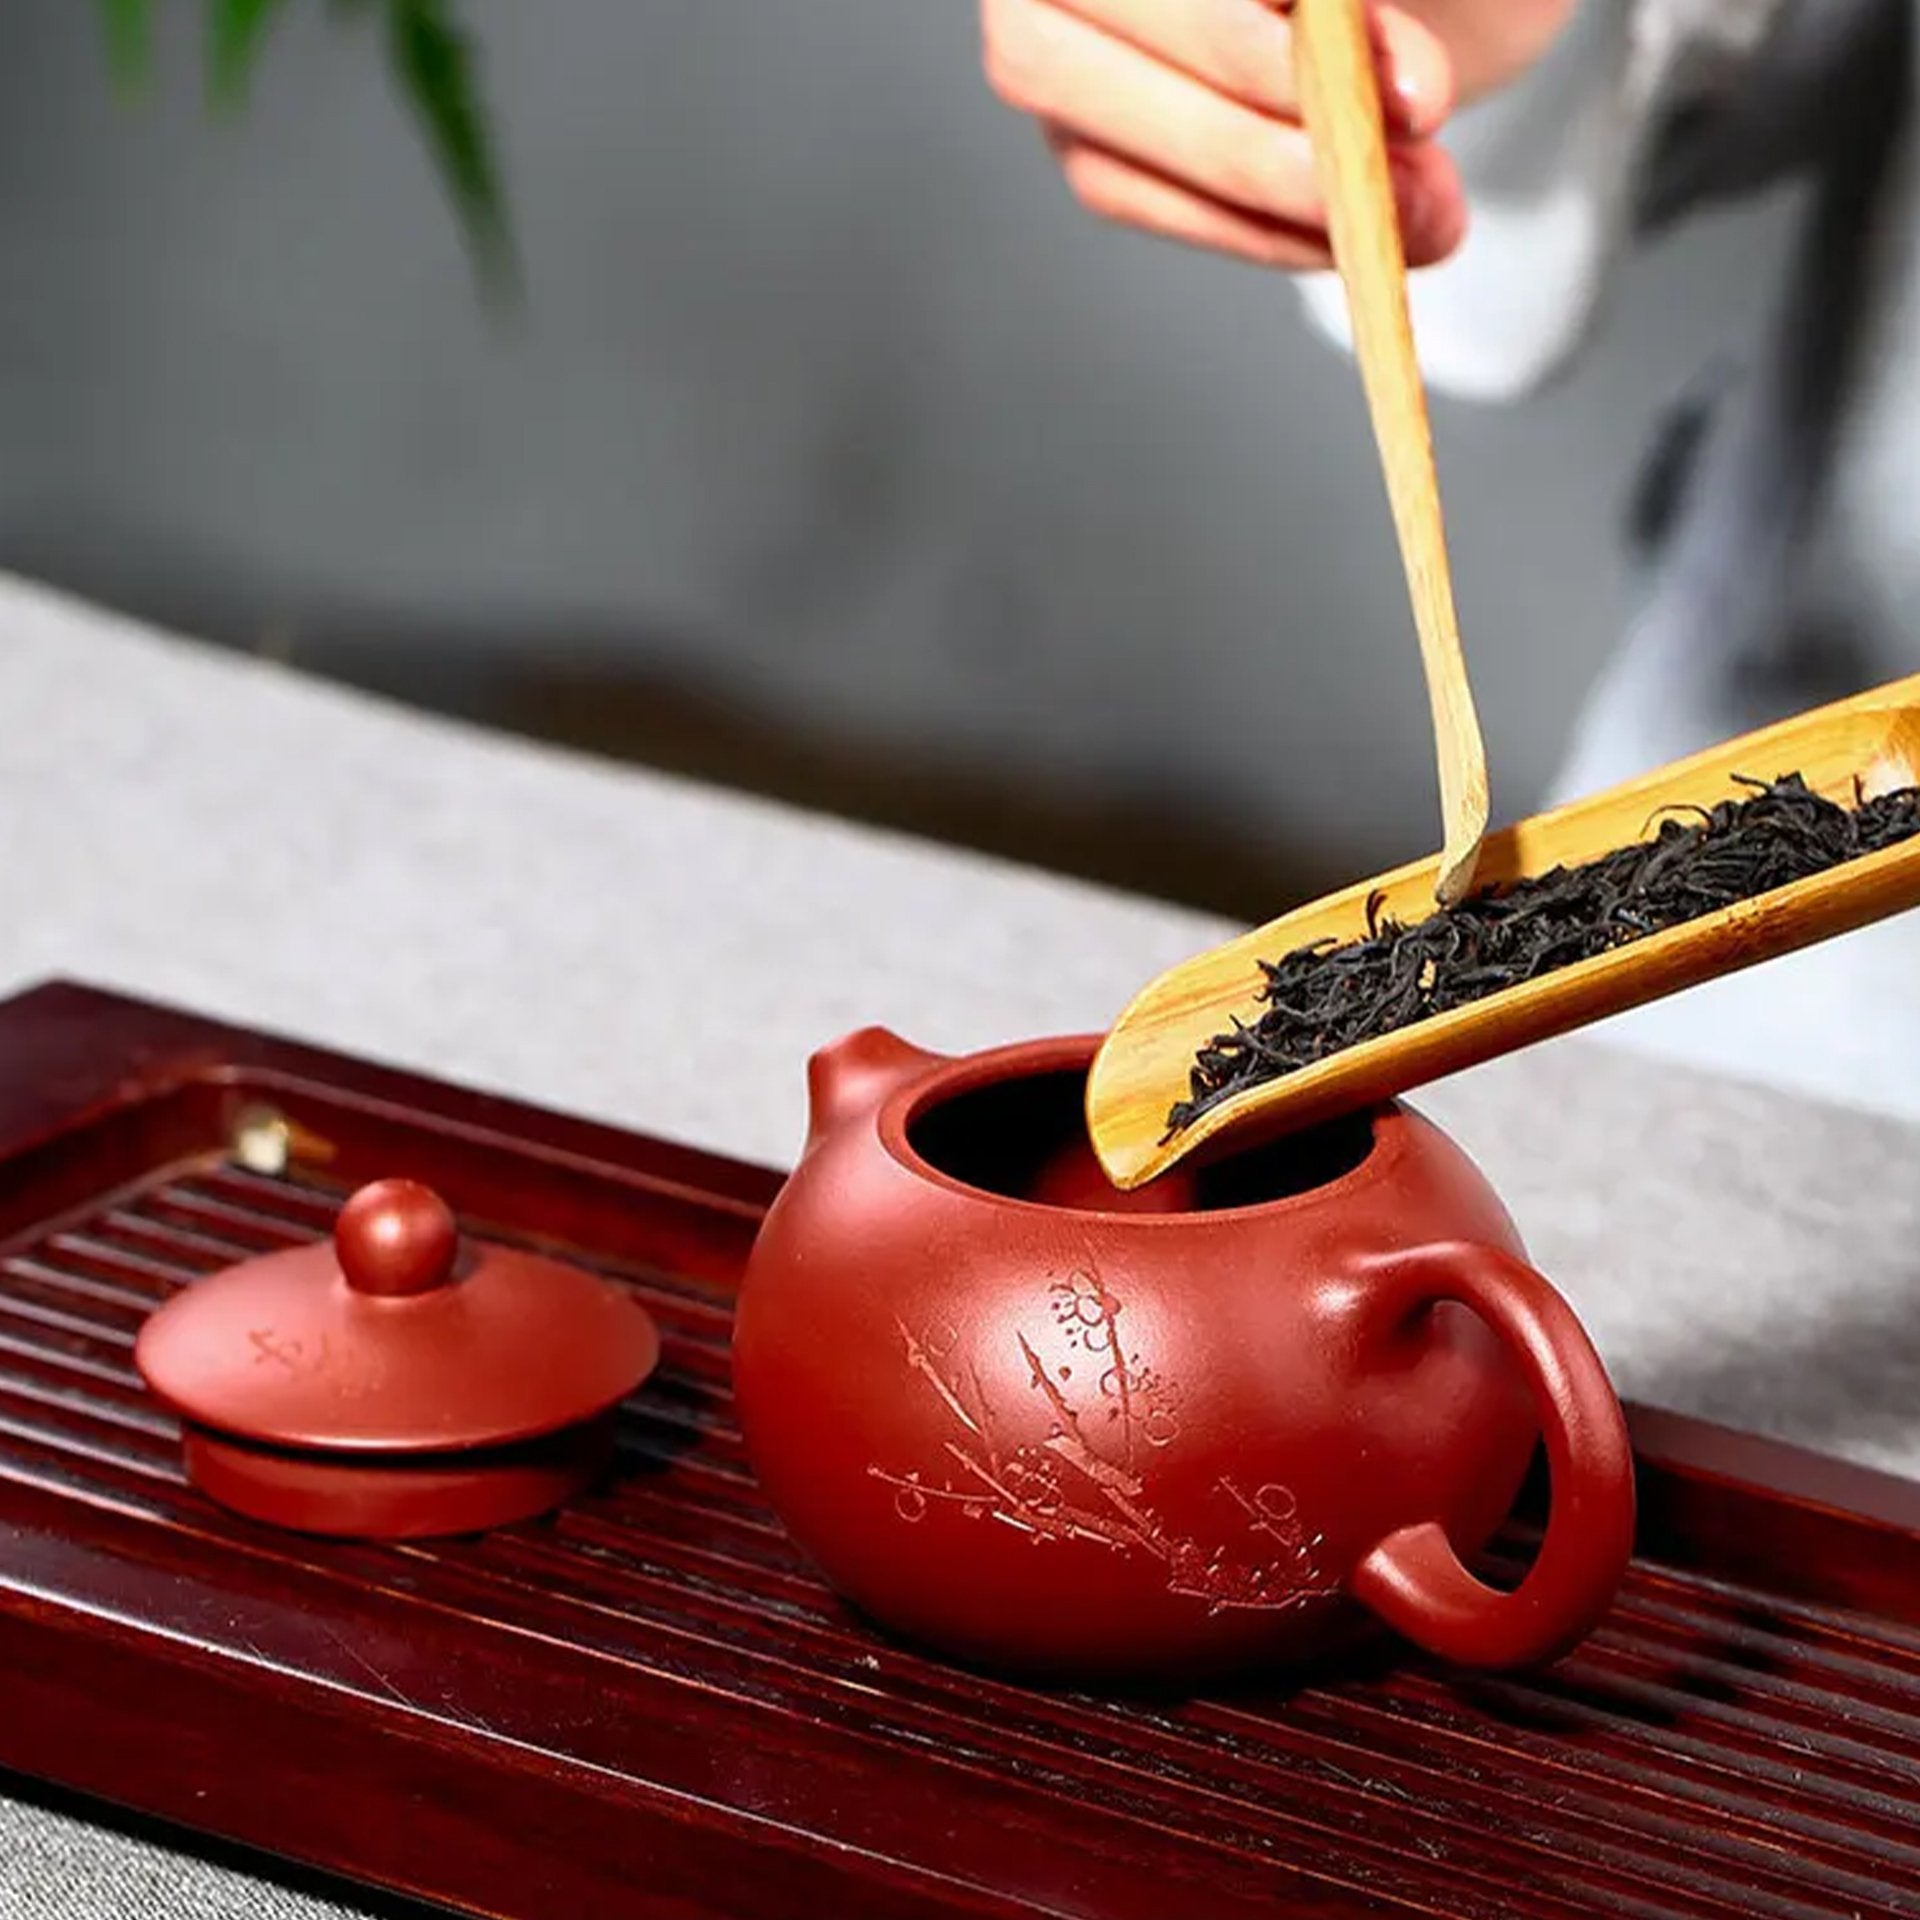 Hand filling a red clay teapot with loose black tea, showcasing traditional tea preparation.